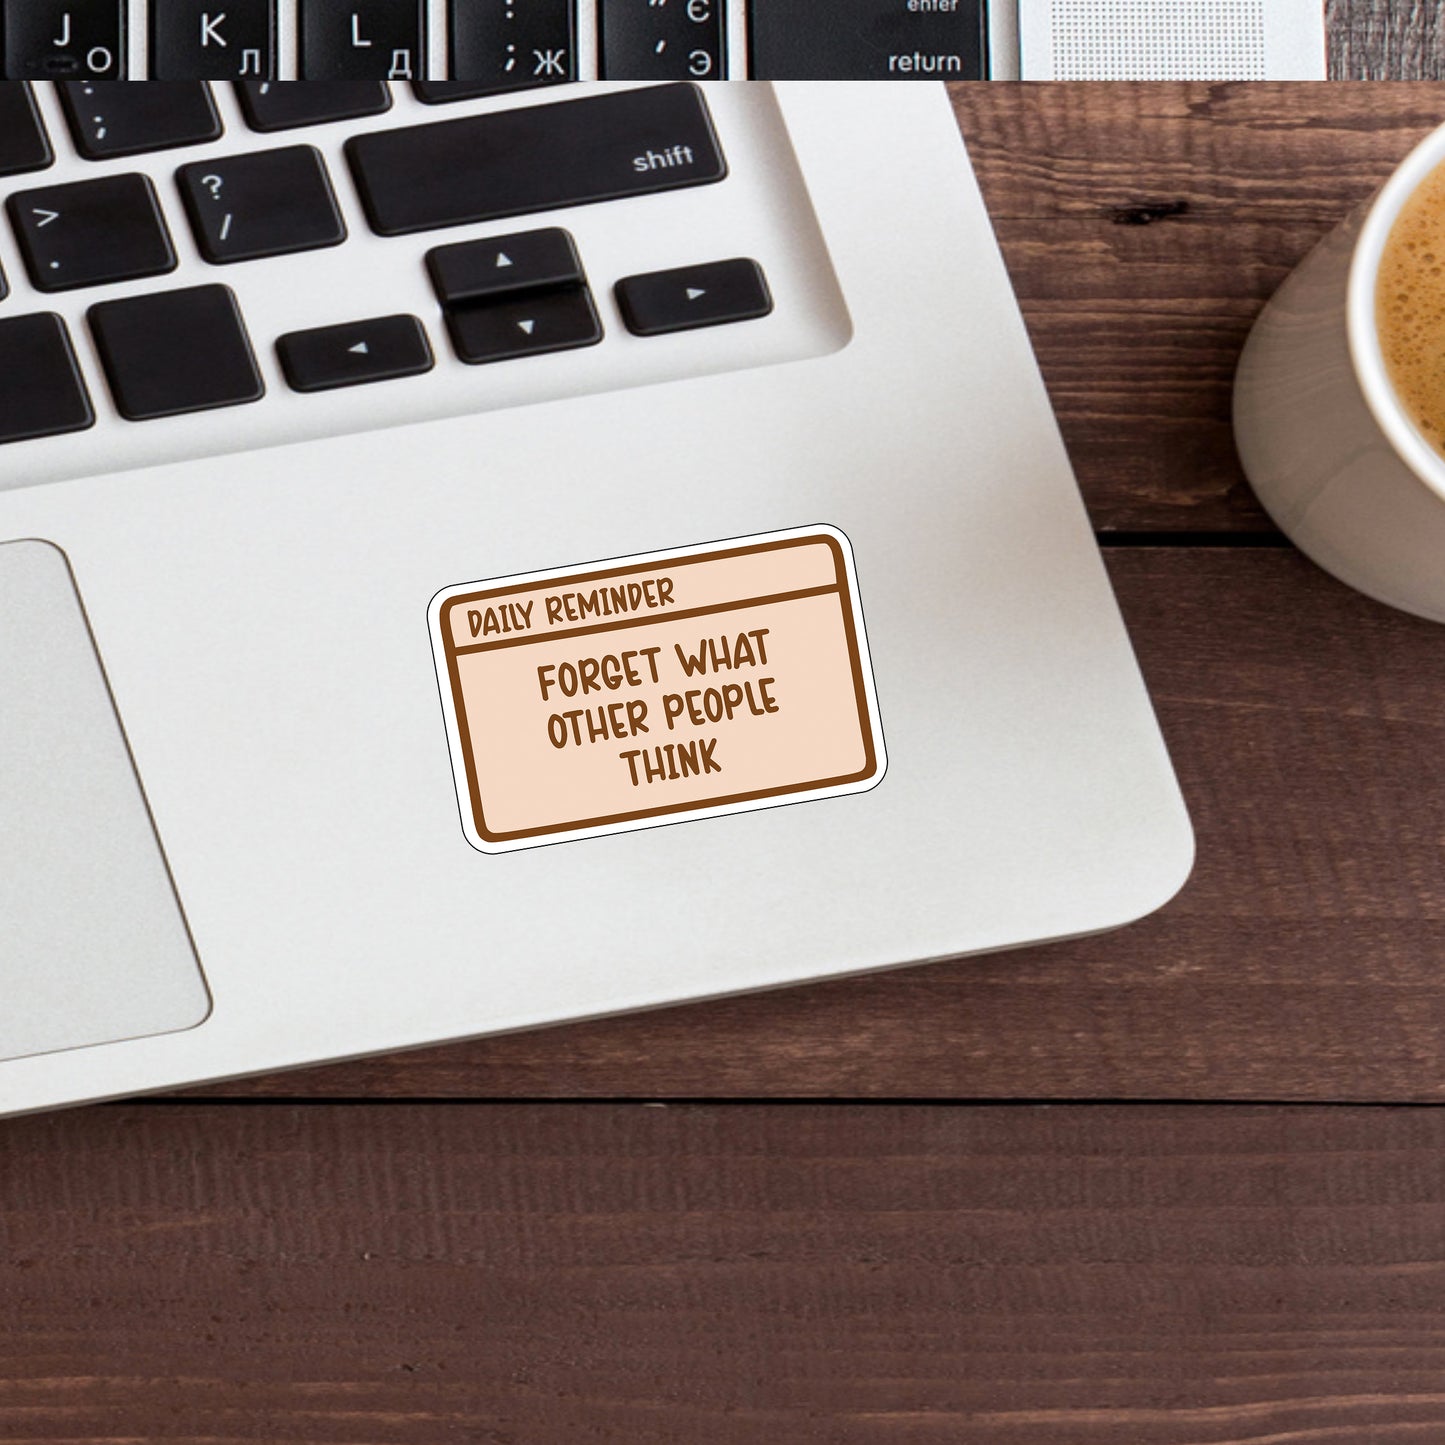 Forgot What Others Think Sticker, Express Yourself with our Unique Vinyl Stickers for Laptops, Tablets, and More!